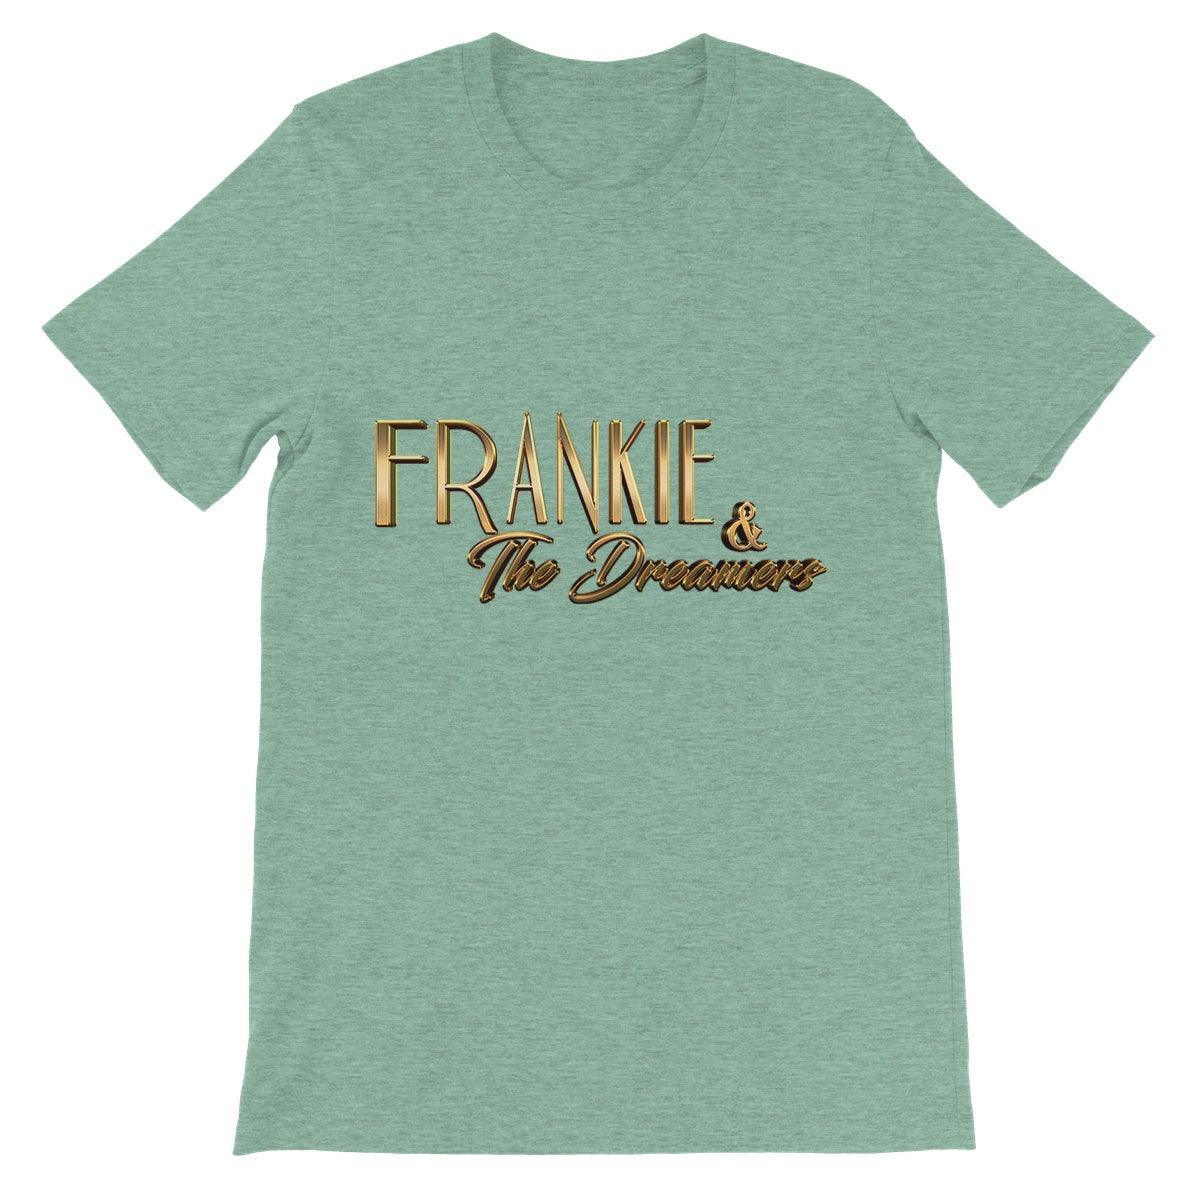 Frankie And The Dreamers Unisex Short Sleeve T-Shirt | Apparel Heather Mint